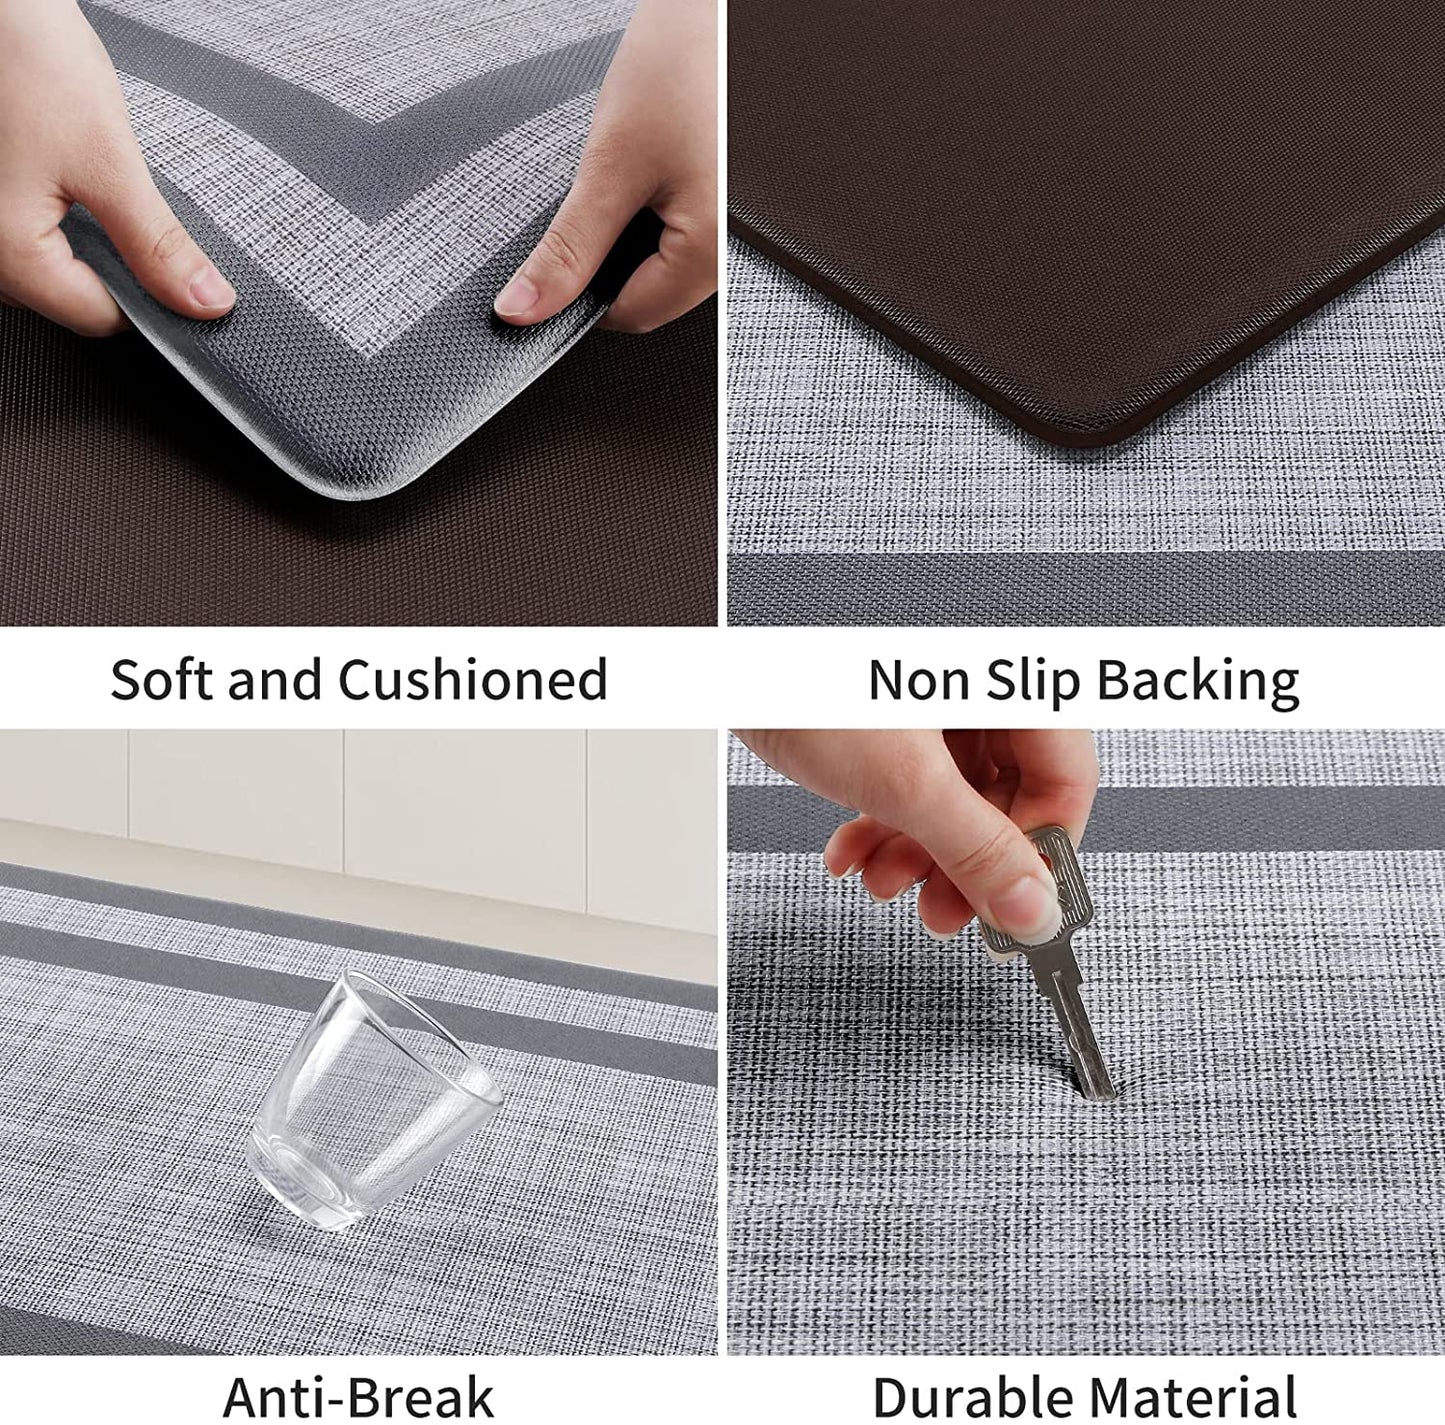 Kitchen Mat [2 PCS] Cushioned Anti-Fatigue Kitchen Rugs Non-Skid Waterproof Kitchen Mats and Rugs Ergonomic Comfort Standing Mat for Kitchen, Floor, Office, Sink, Laundry, Gray and Gray